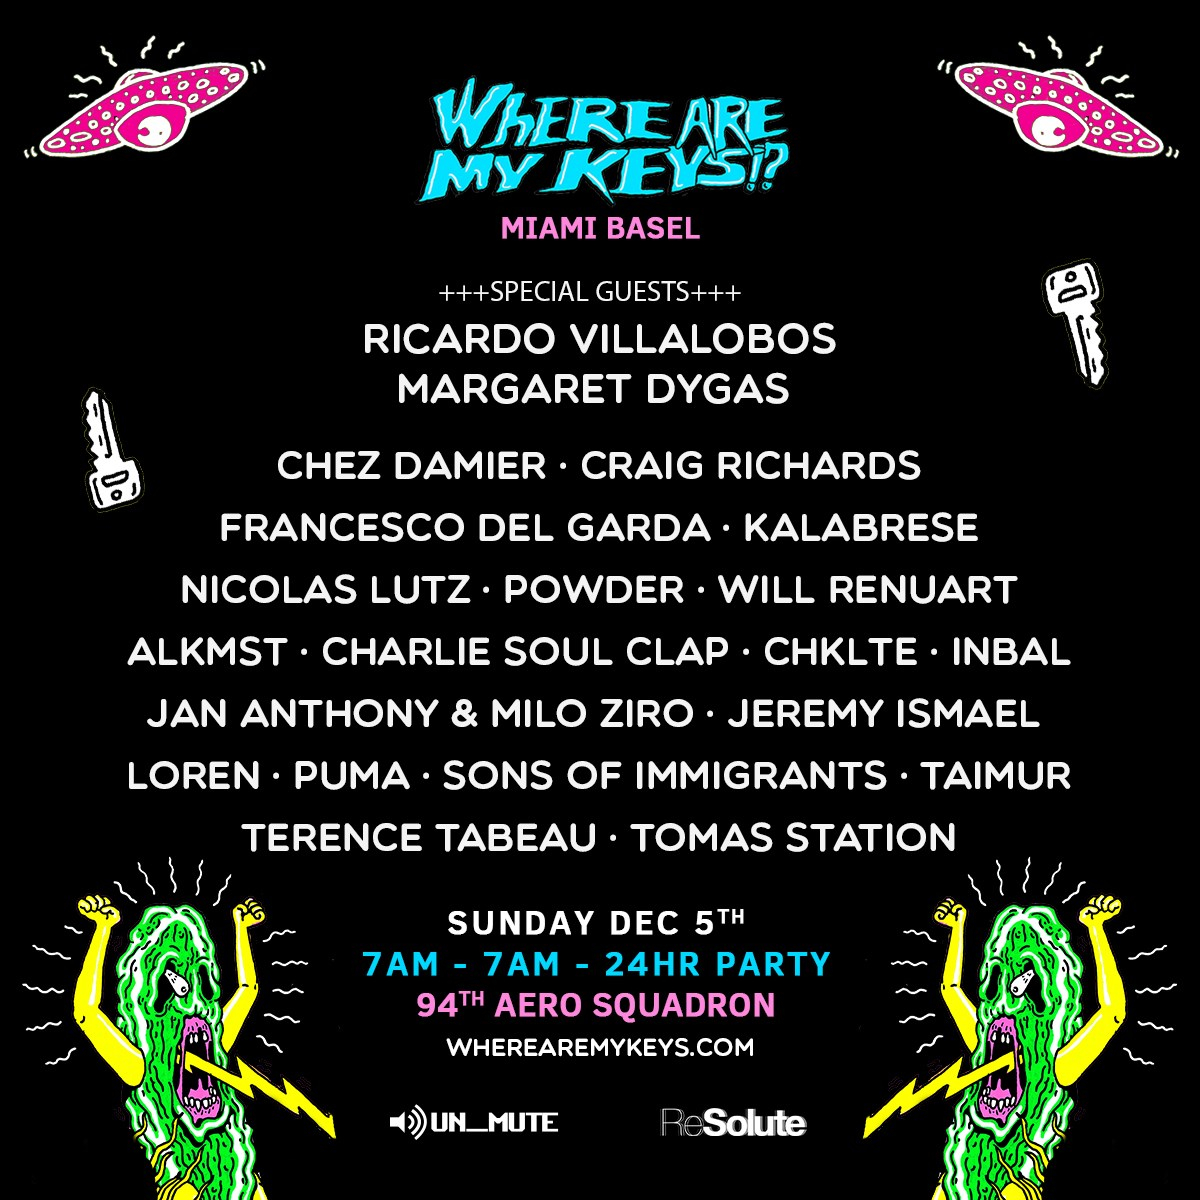 Where Are My Keys - Miami Basel - Flyer front